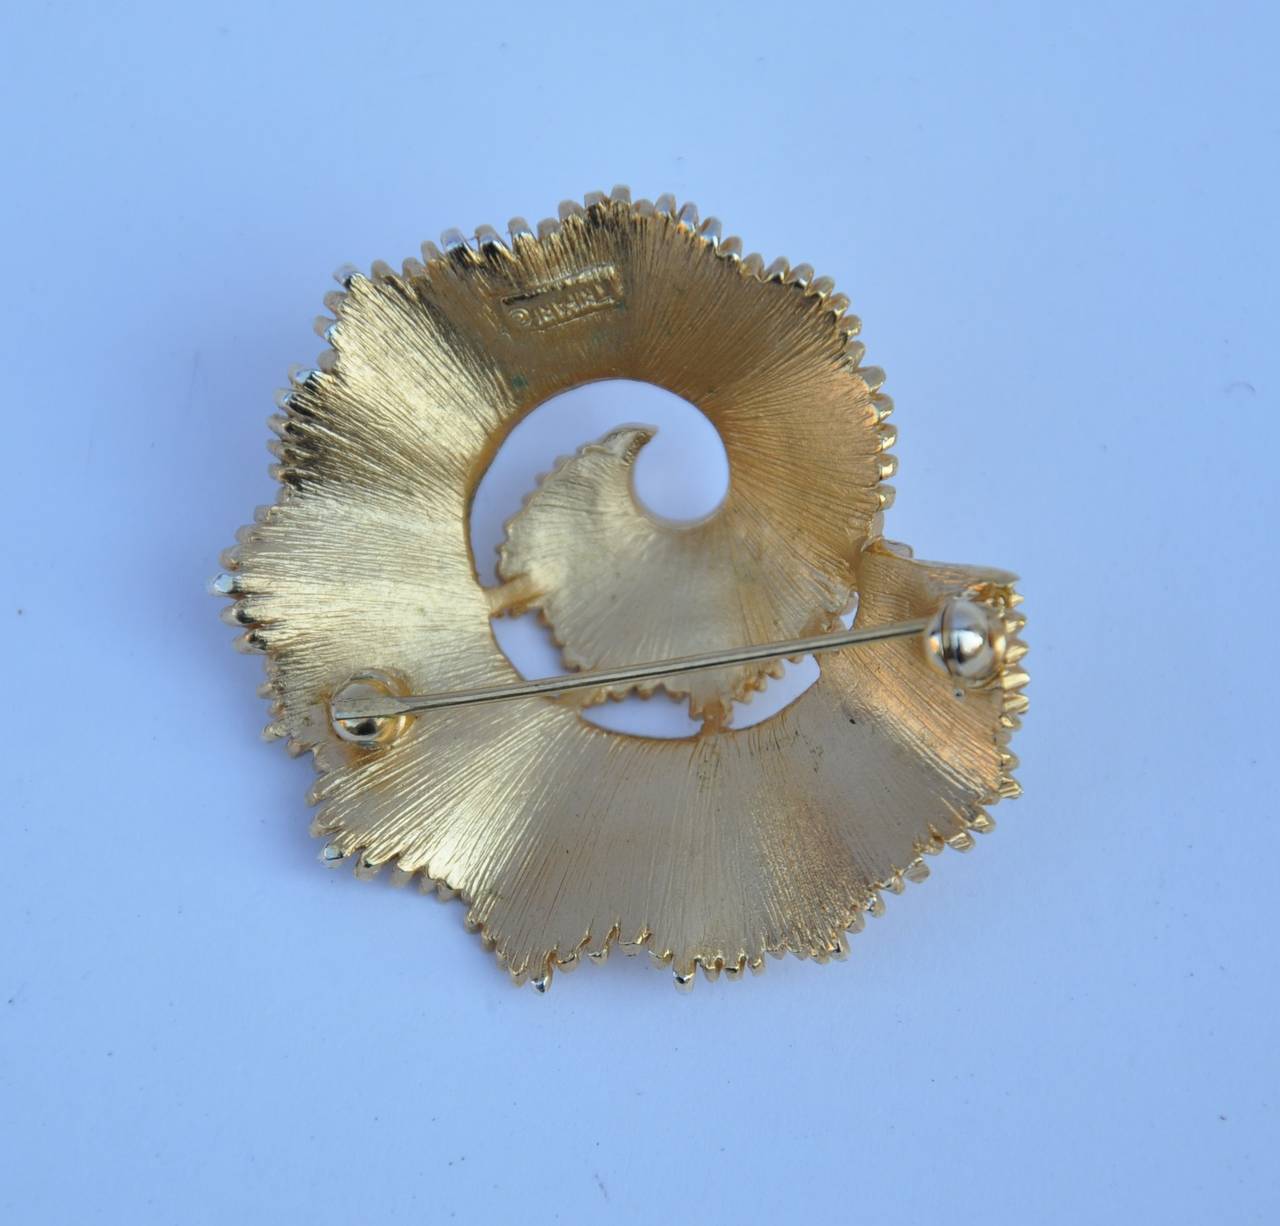 Trifari "Swirl" gold-tone hardware accented with rhinestone brooch measures 1 3/4" in length, 1 5/8" in width and 5/8" in depth. Brooch is signed on the back.